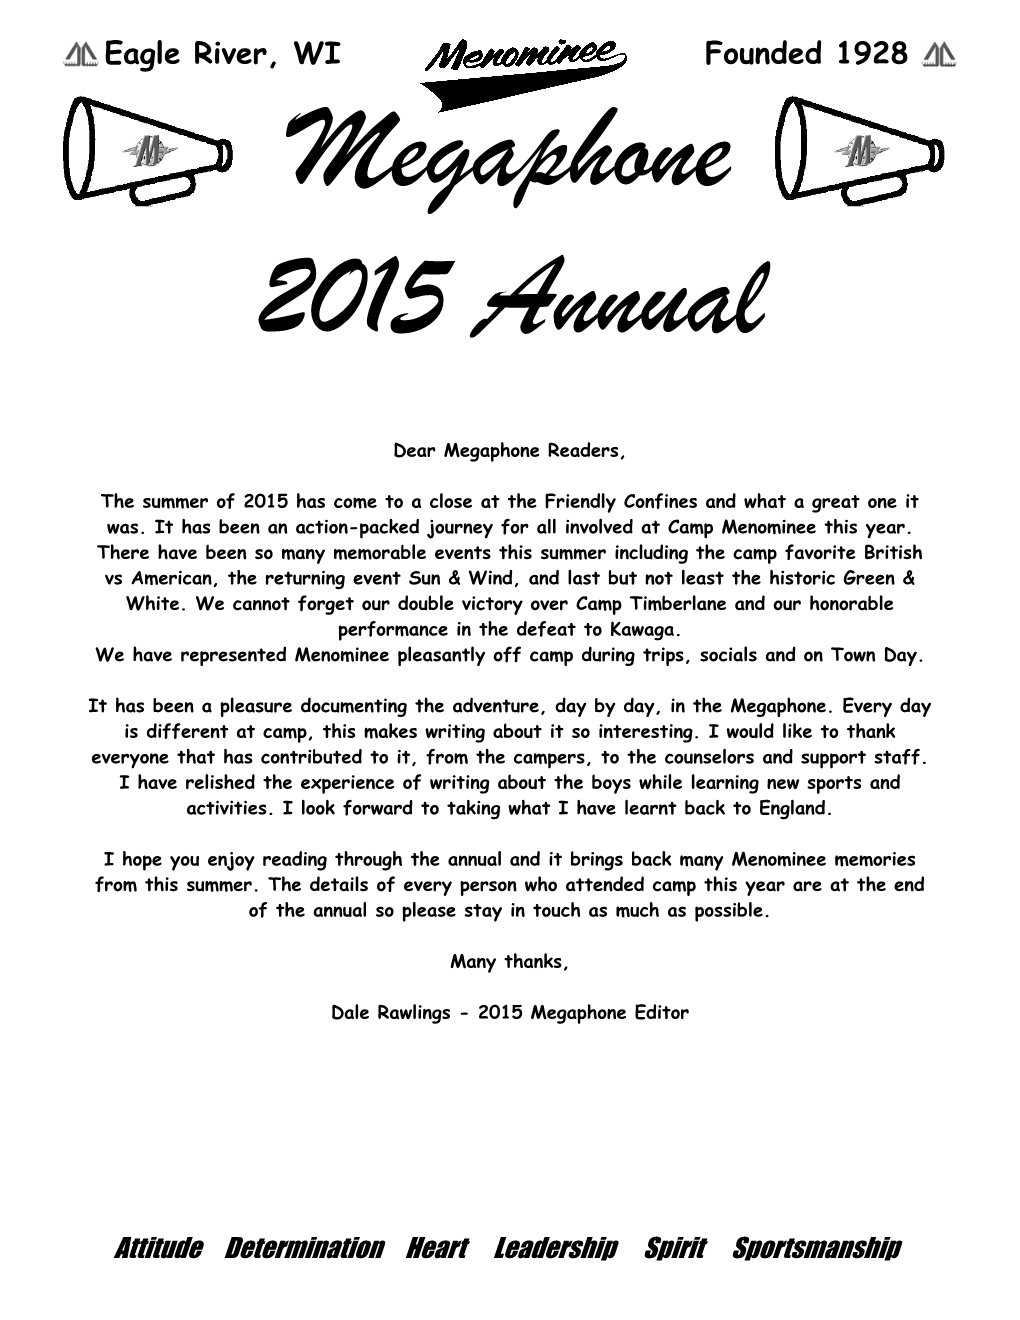 Eagle River, WI Founded 1928 Megaphone 2015 Annual